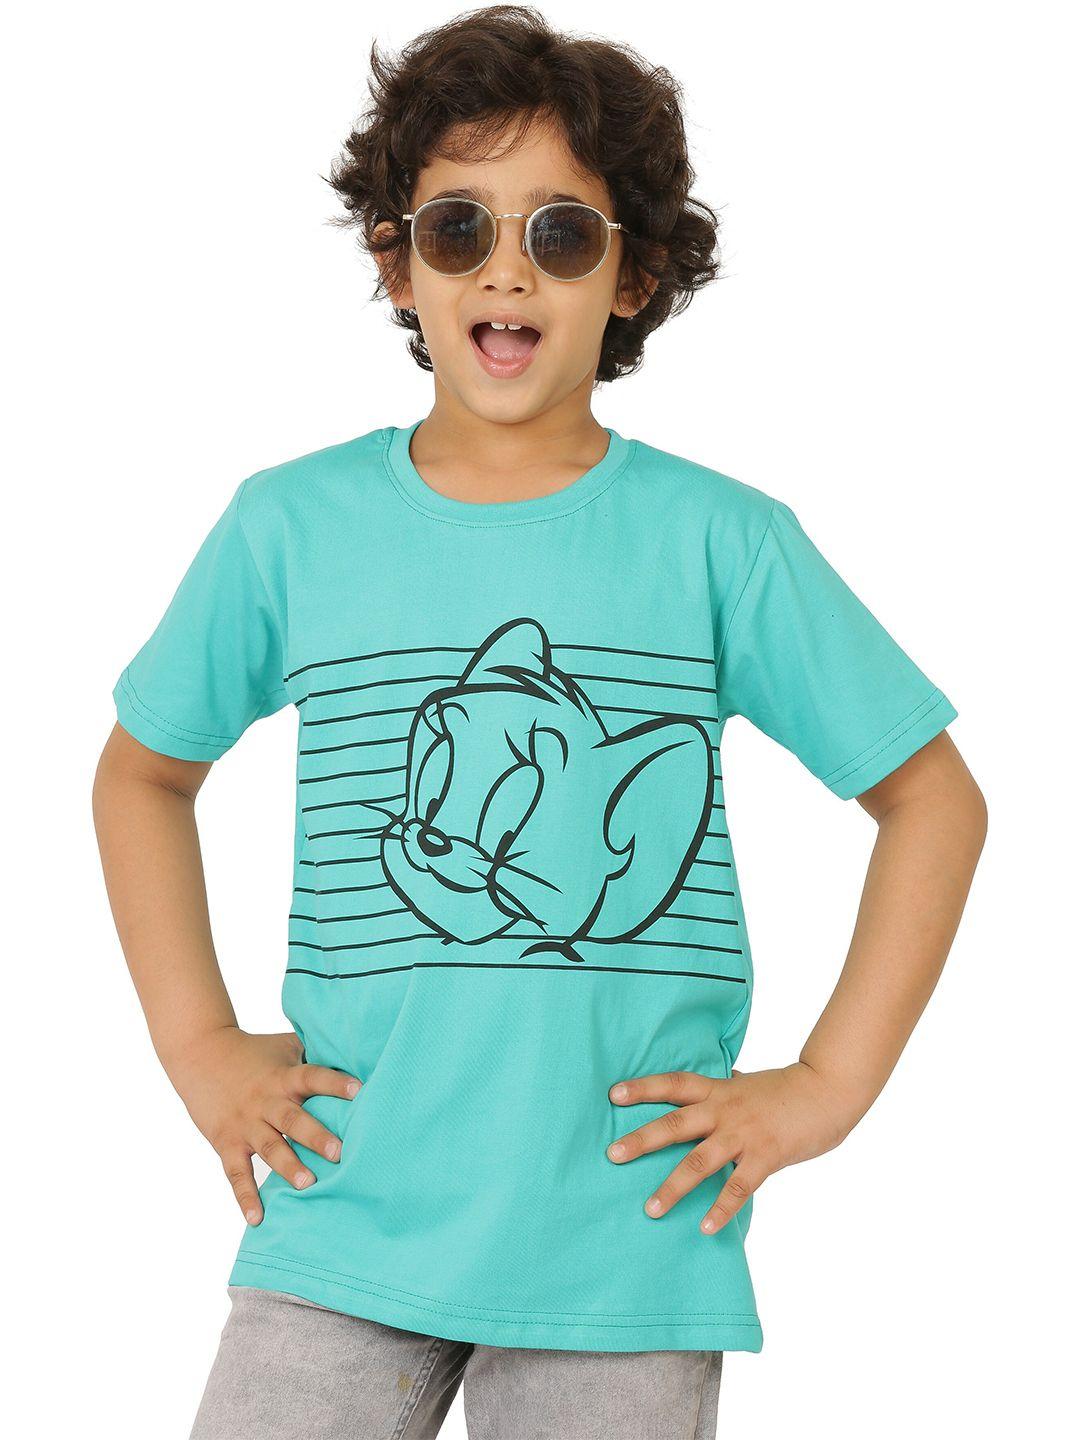 smartraho boys jerry printed casual cotton t-shirt